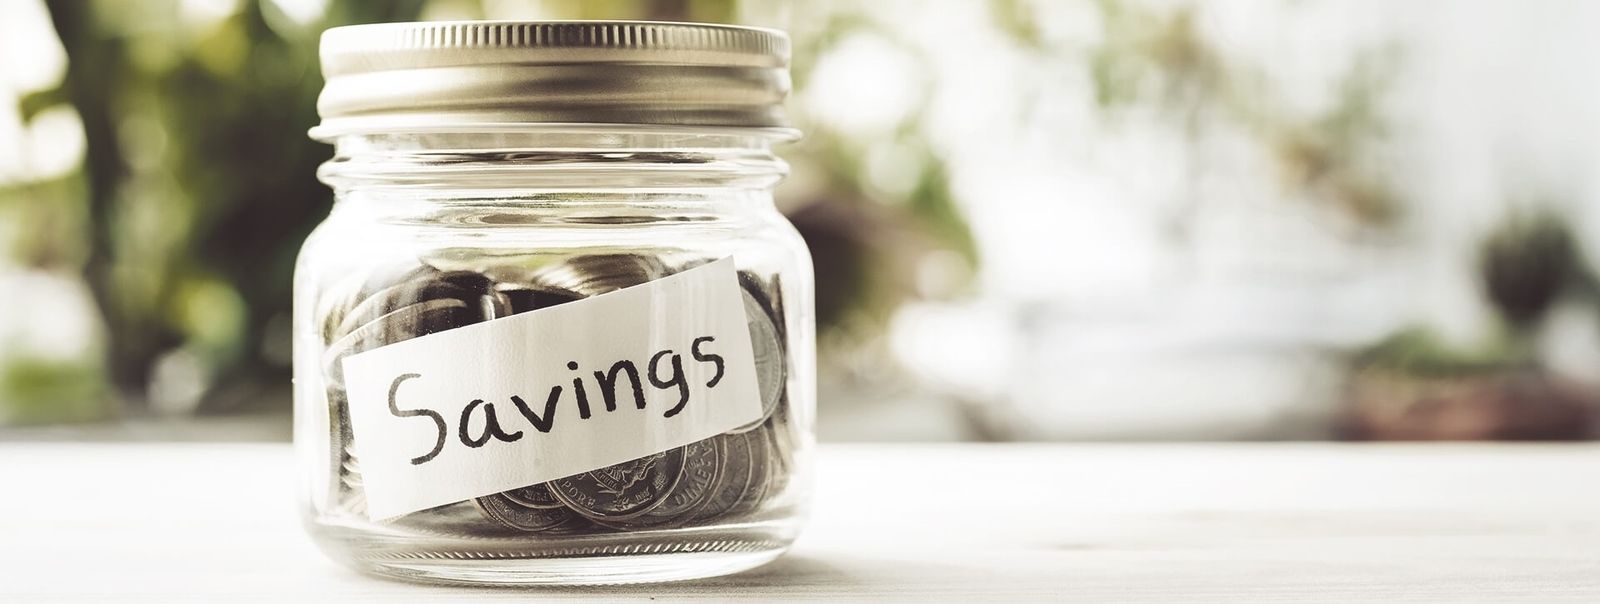 Top 7 tips on how to keep your savings safe